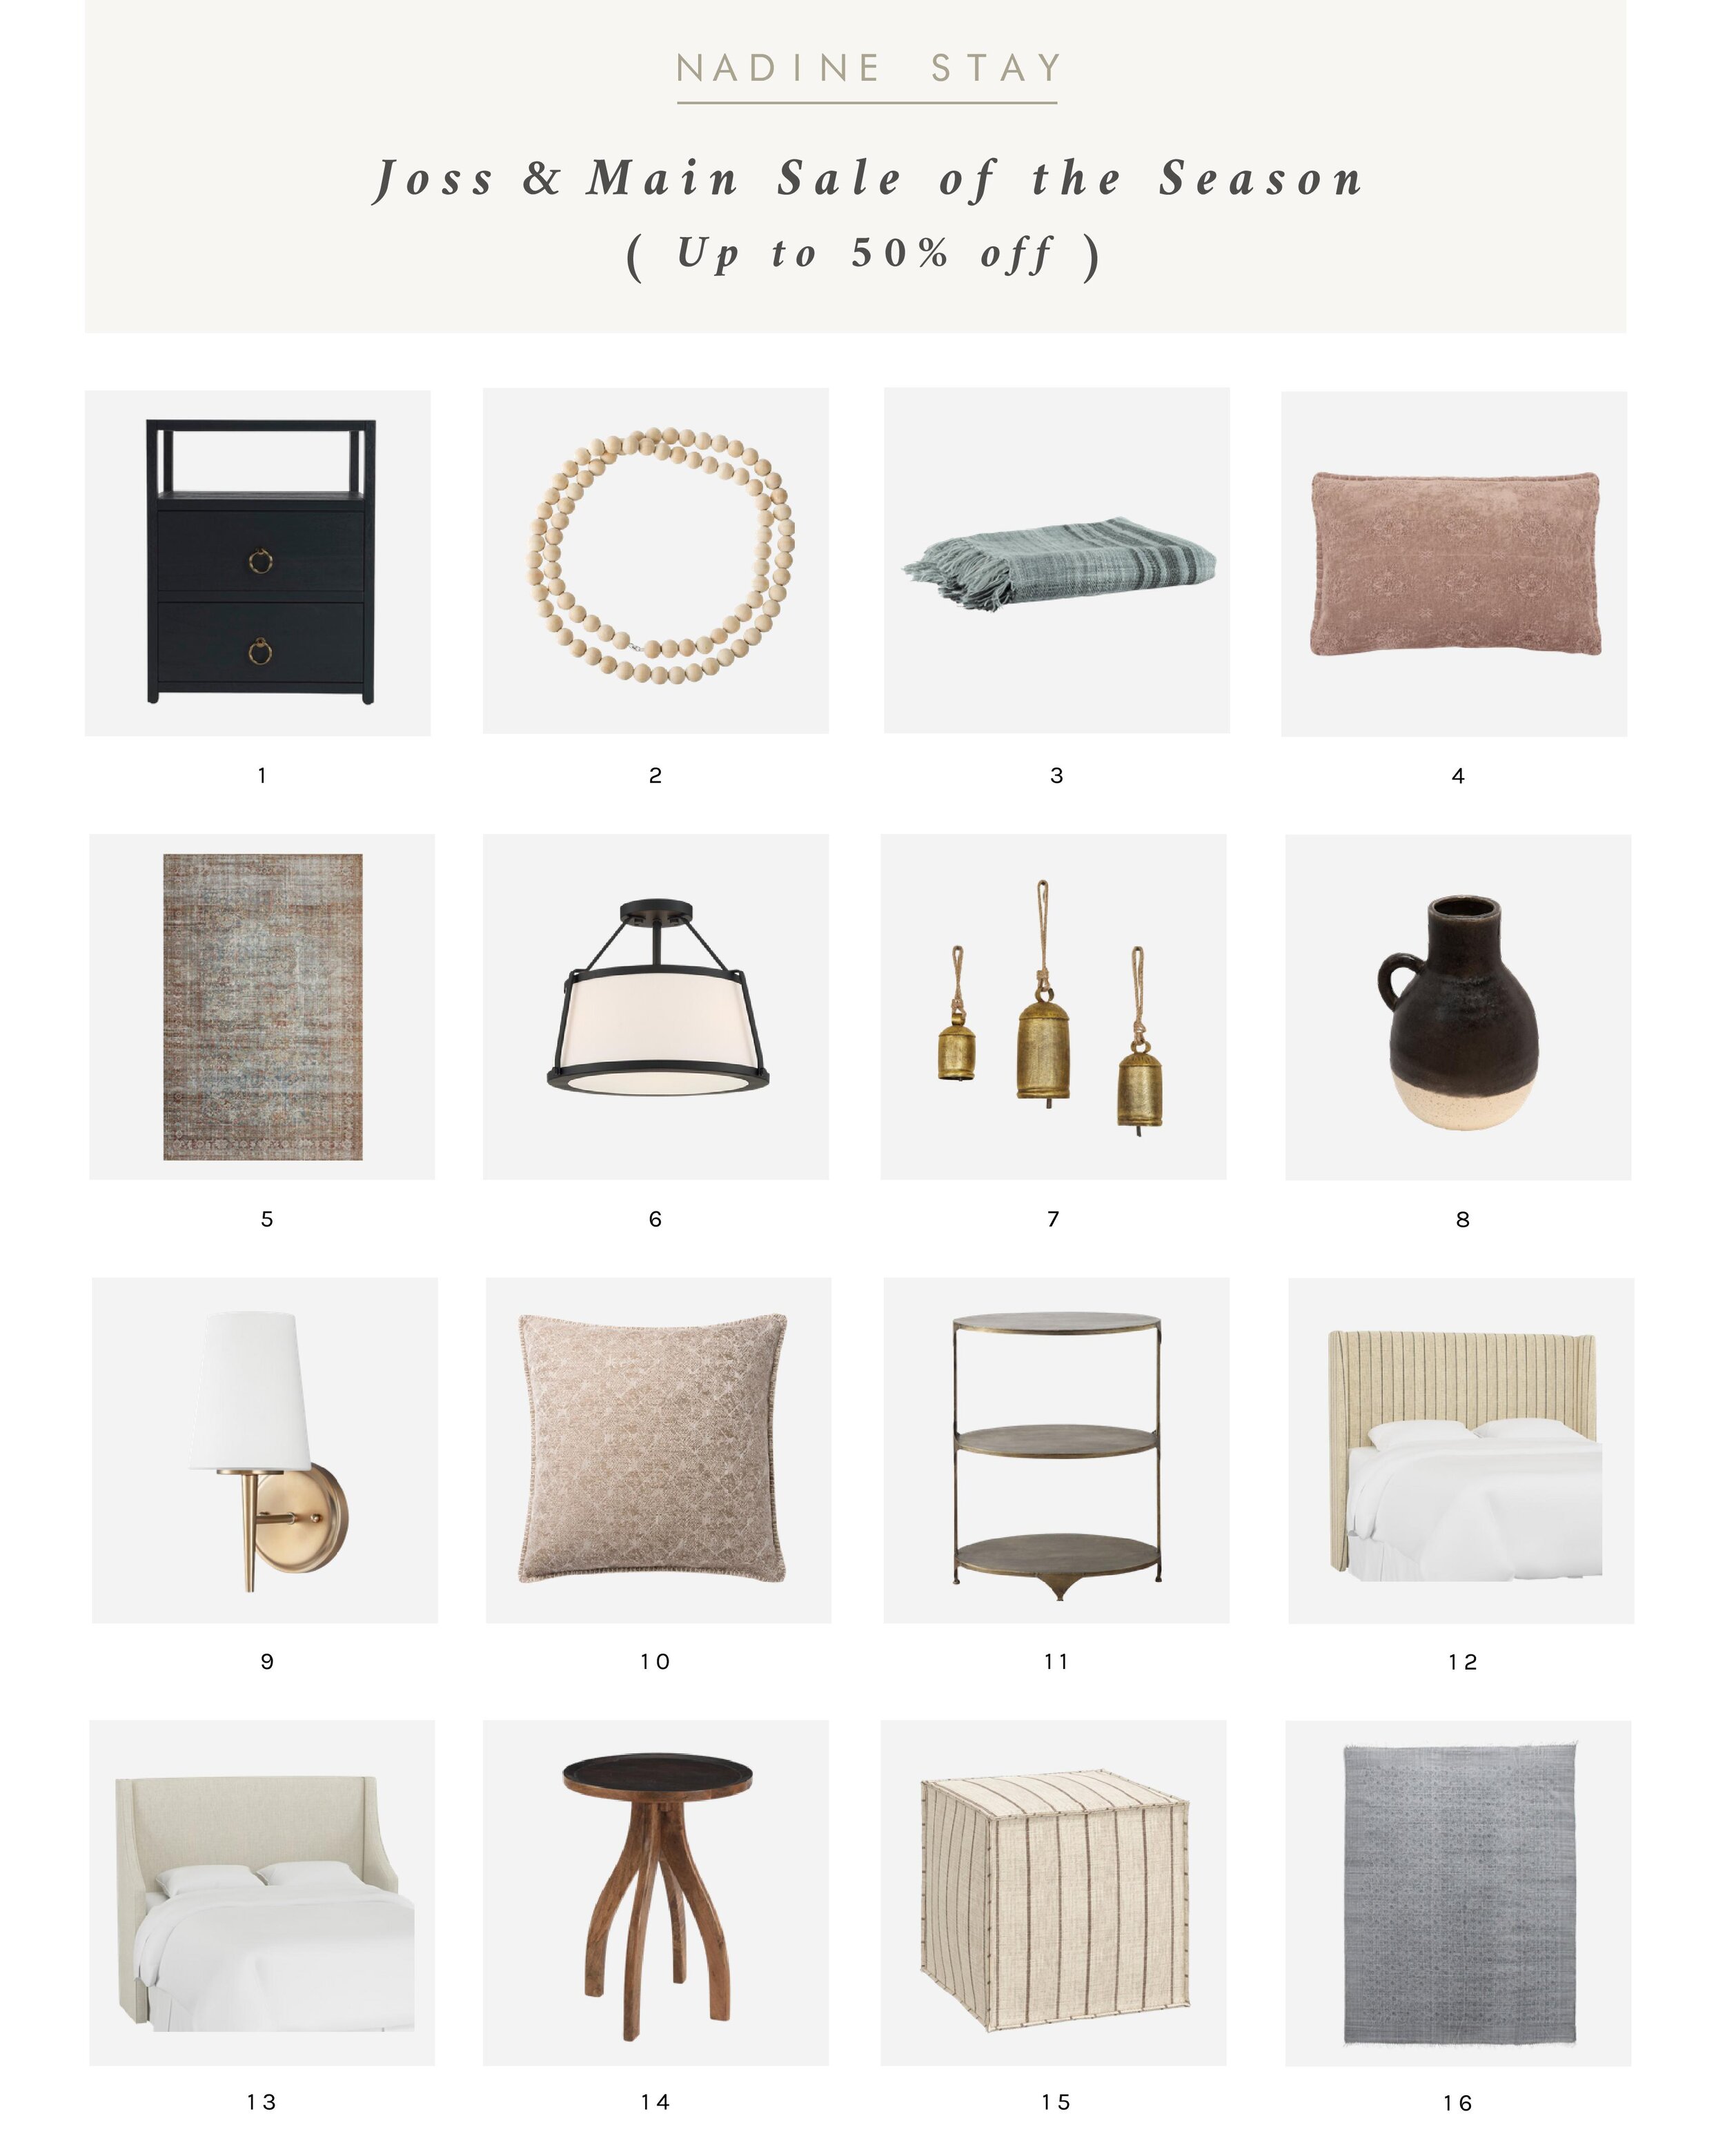 Joss & Main Sale of the season, the pieces I bought for our bedroom, & my top picks from Joss & Main | Nadine Stay